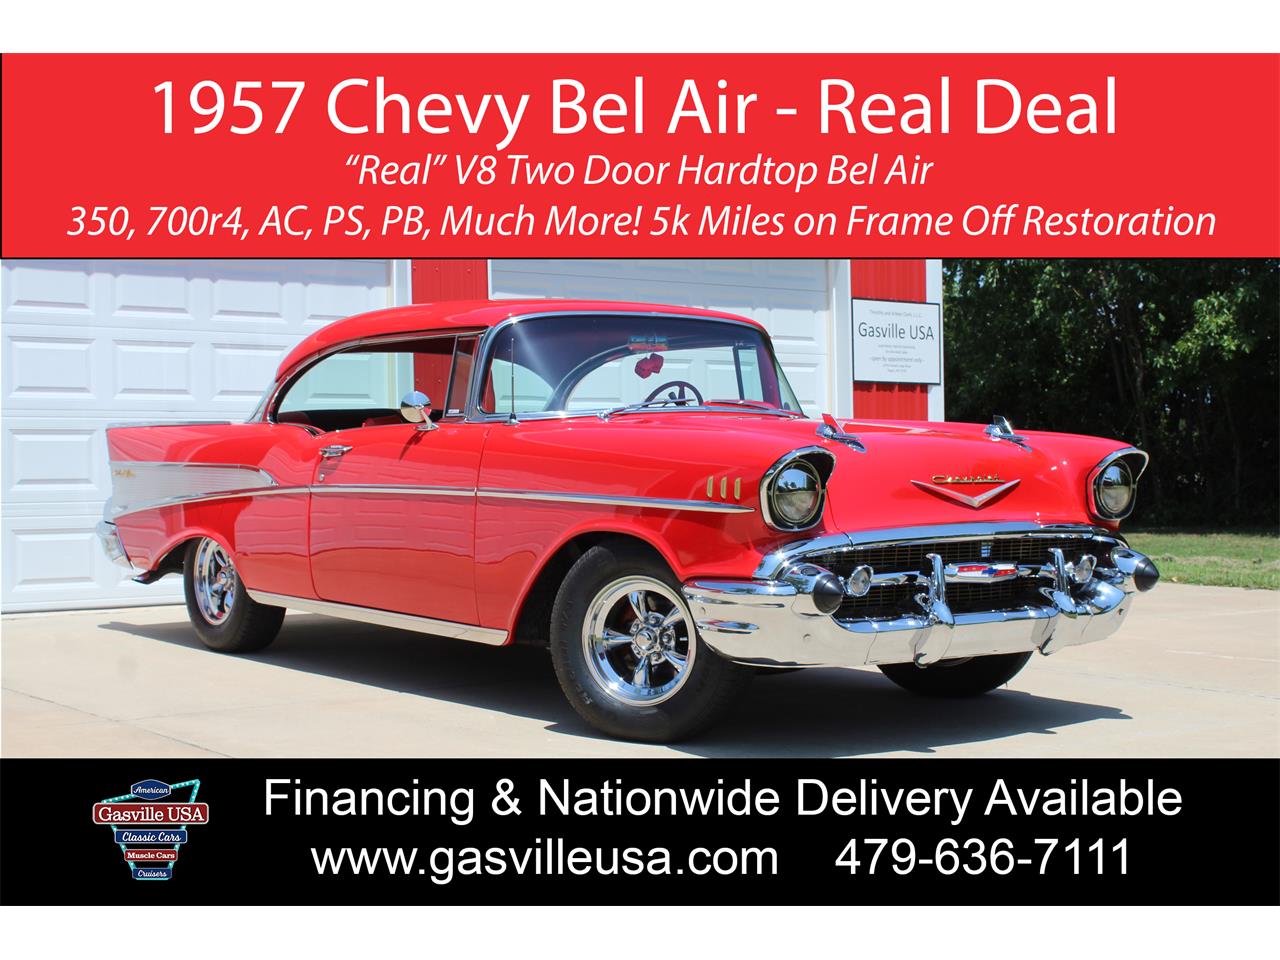 For Sale: 1957 Chevrolet Bel Air in Rogers, Arkansas for sale in Rogers, AR